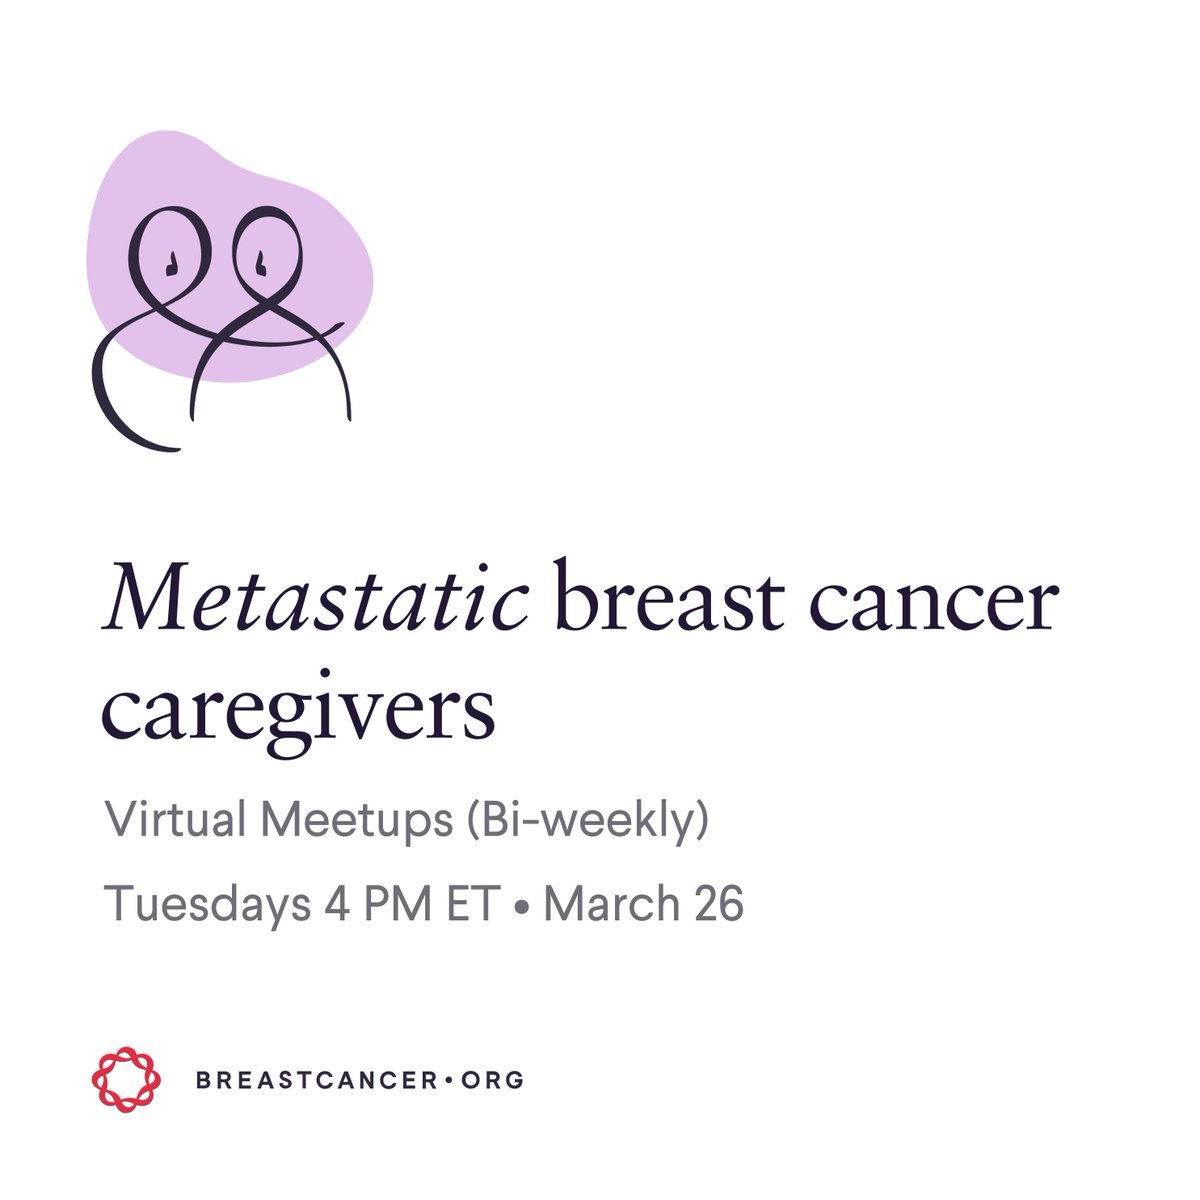 We offer a free caregivers meetup for partners of someone with metastatic breast cancer every other Tuesday. If you are a caregiver or have a partner who you think could benefit, please share or join us today at 4 PM ET. To register, visit bit.ly/4aaz3Sf #breastcancer